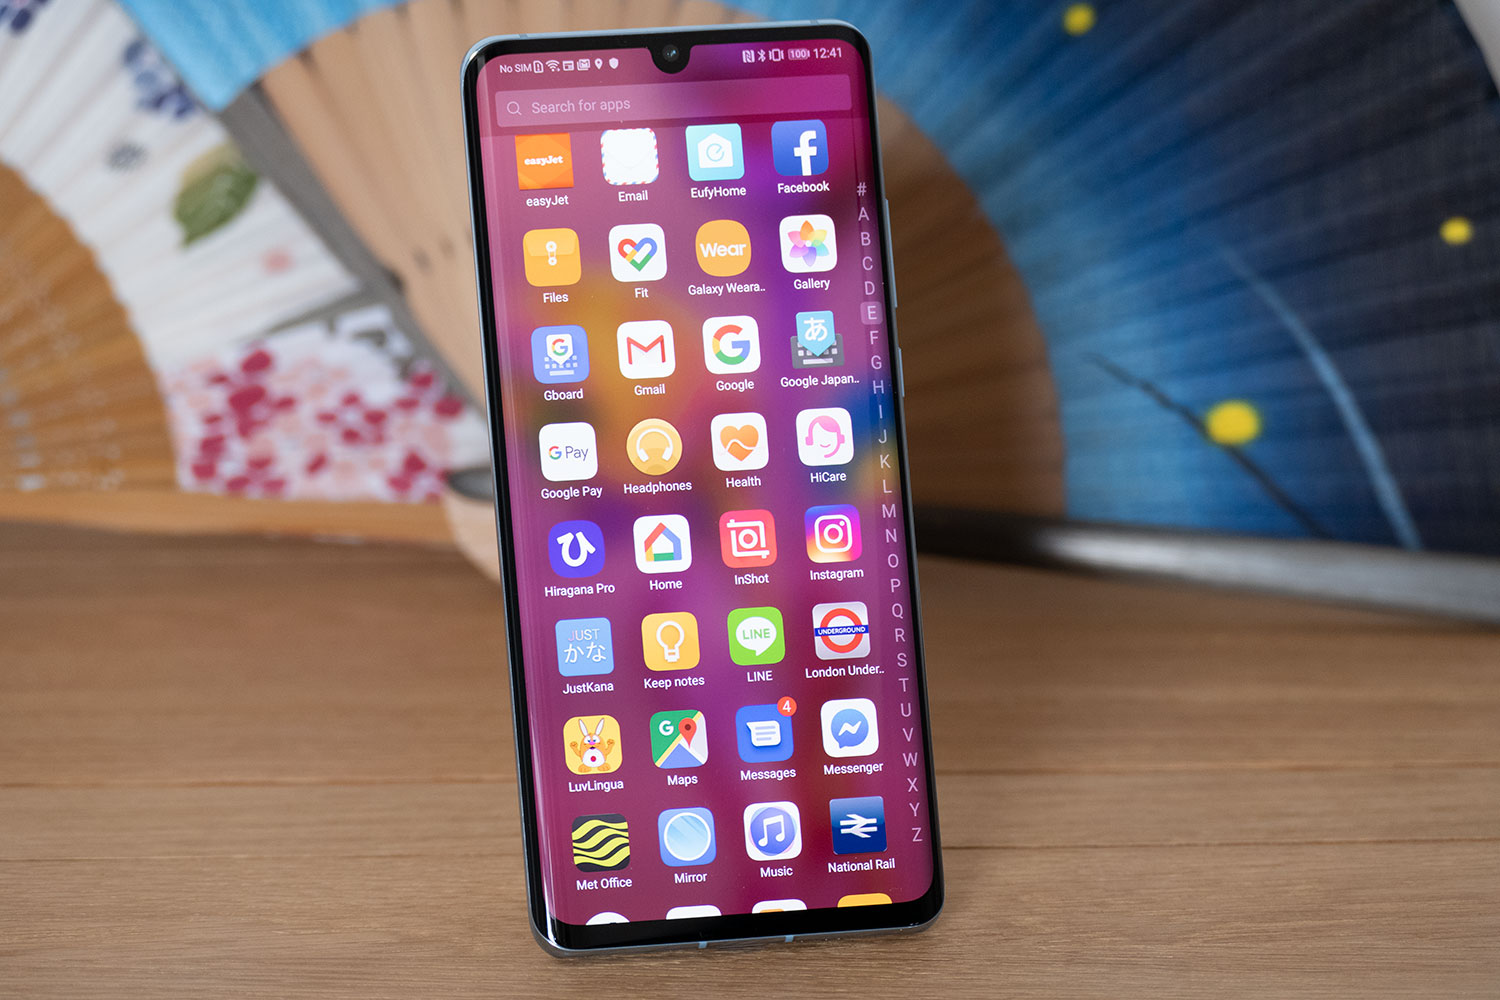 Huawei P30 Pro Review: Our Hands-on First Impression